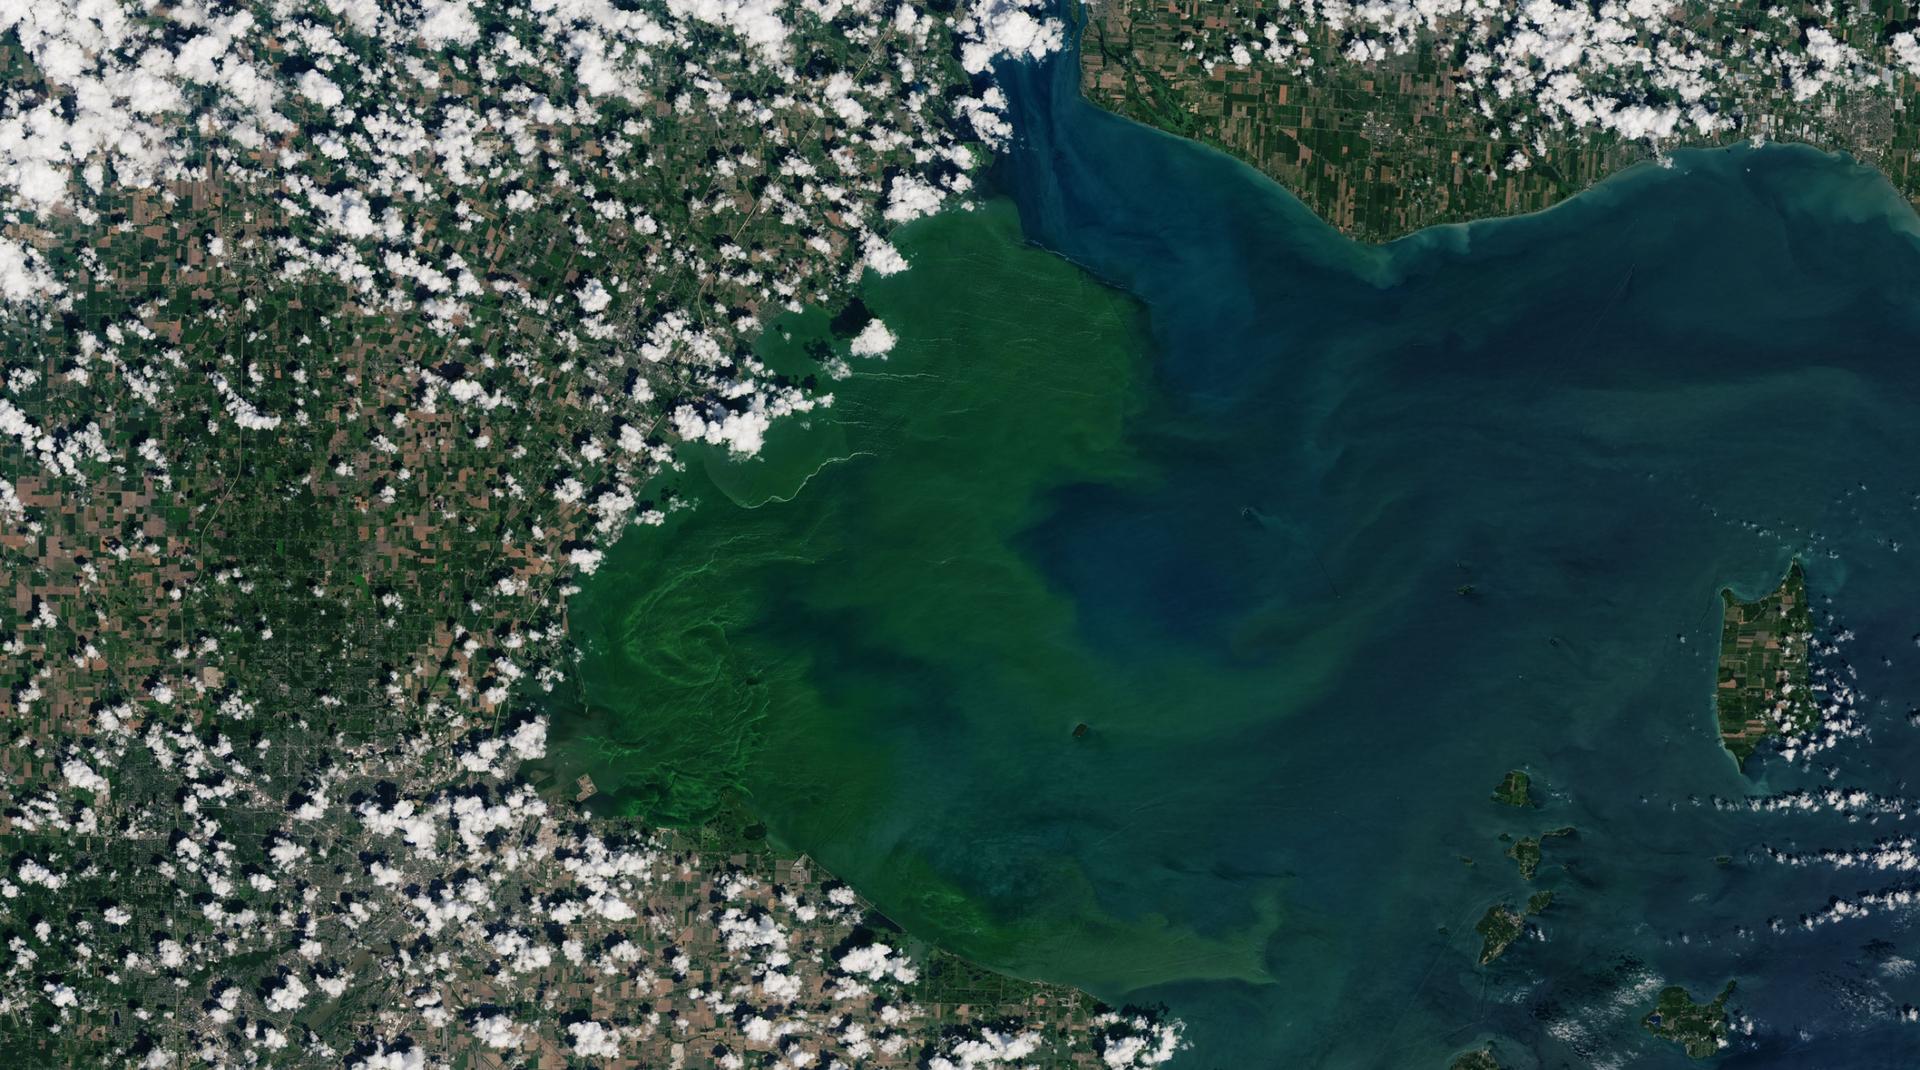 A satellite image showing Lake Erie with a large algae bloom on the western edge of the frame.